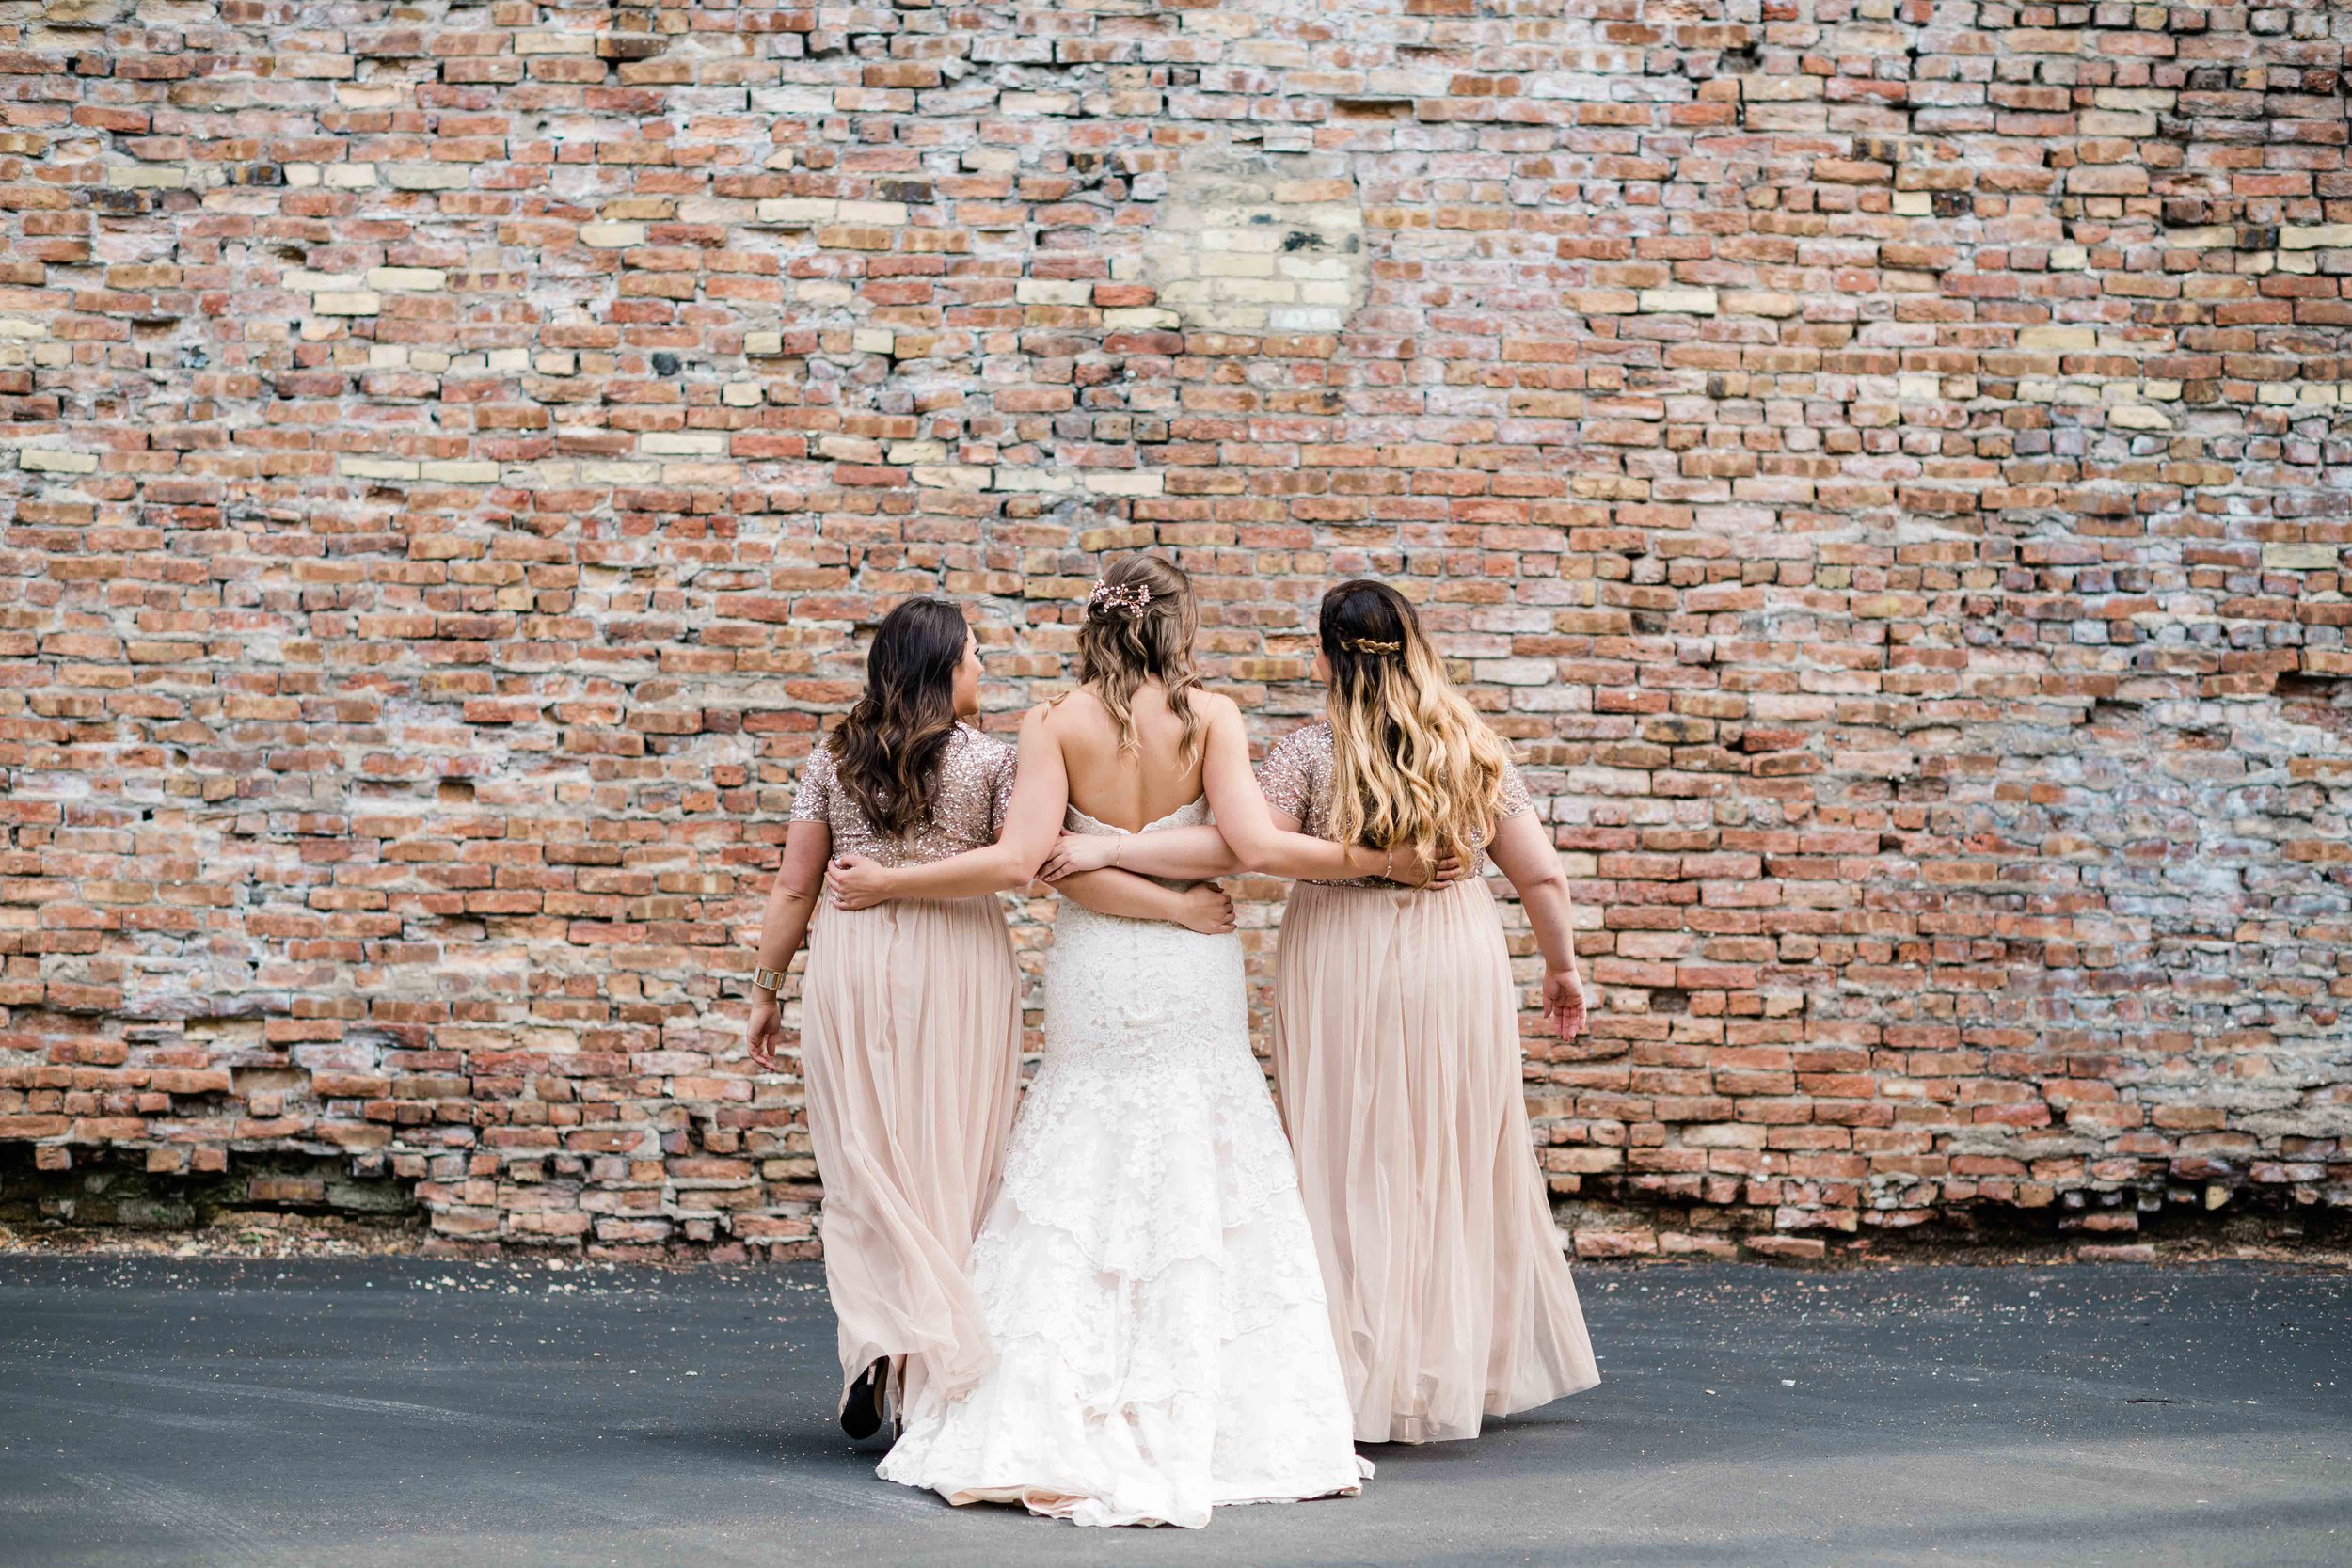 Bride and bridesmaids walk with arms around each other